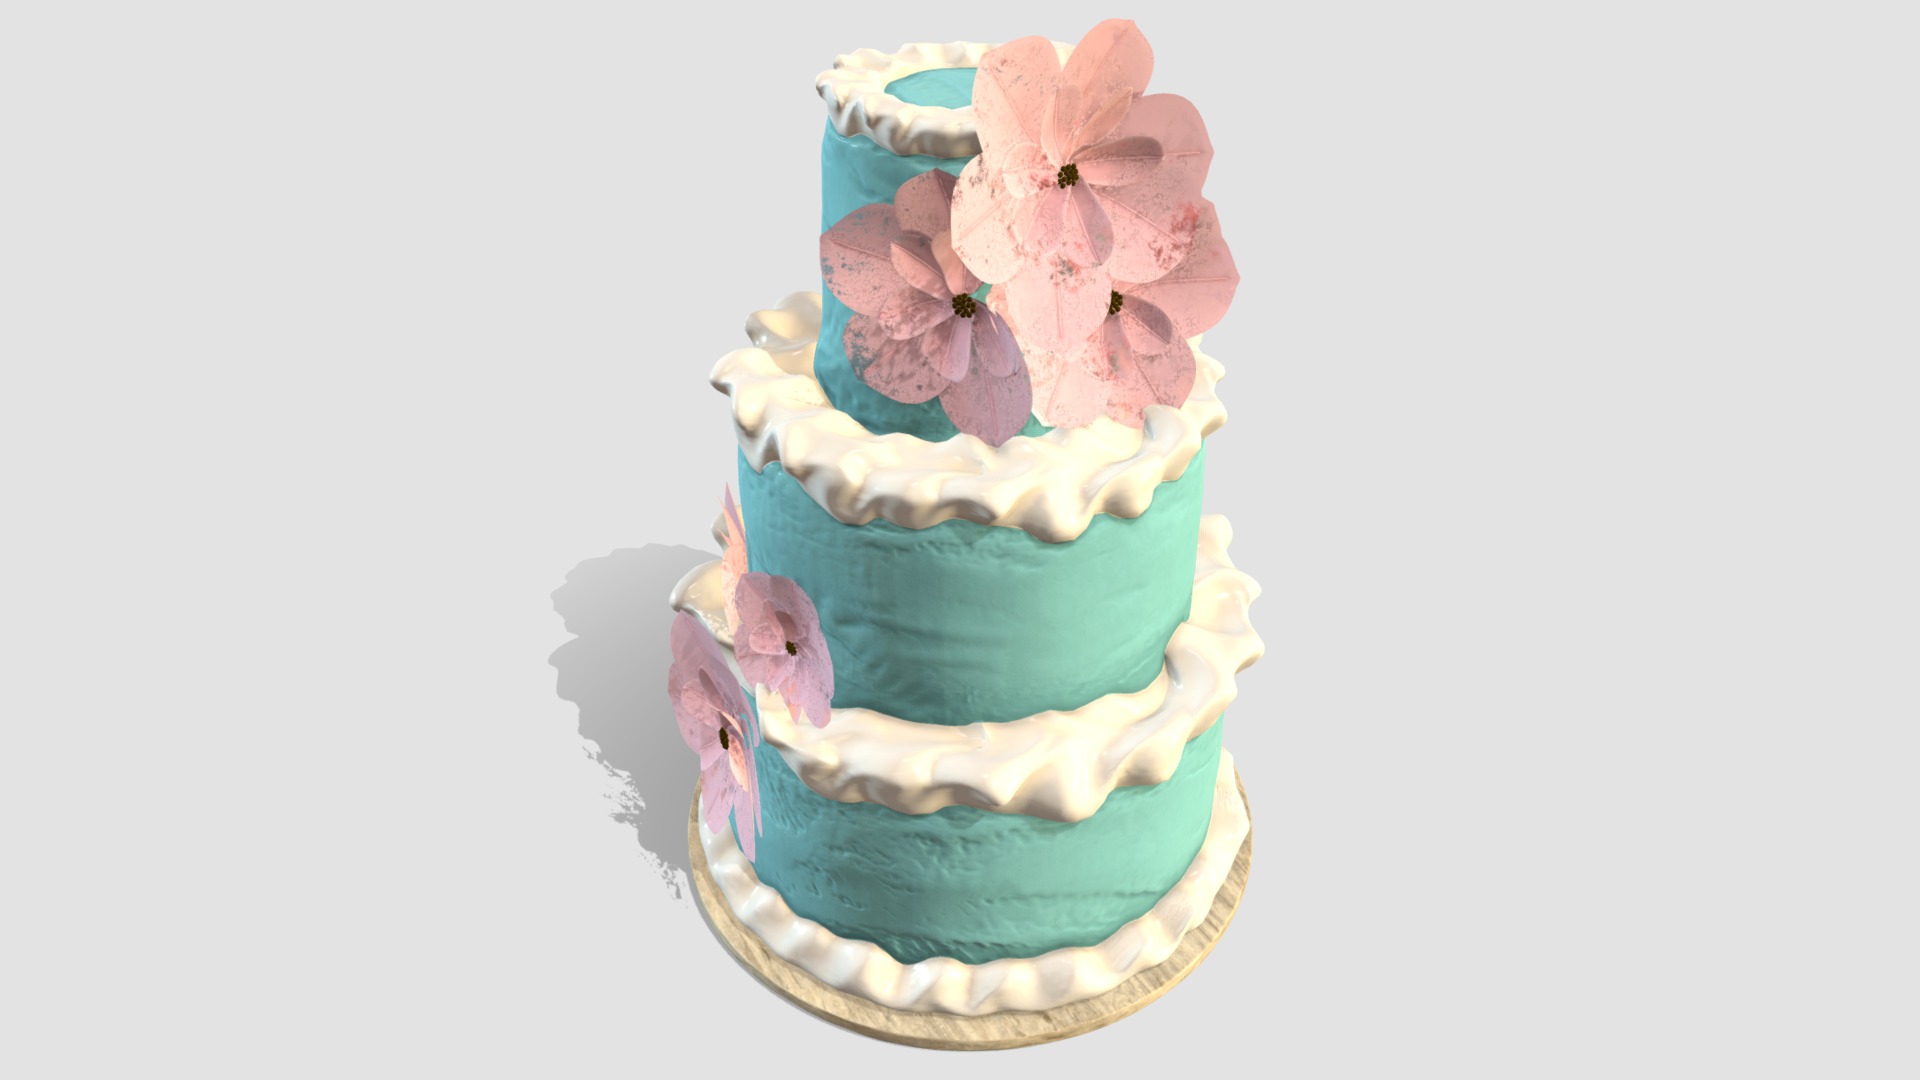 3D model Cake Rose Brich - This is a 3D model of the Cake Rose Brich. The 3D model is about a cake with flowers on top.